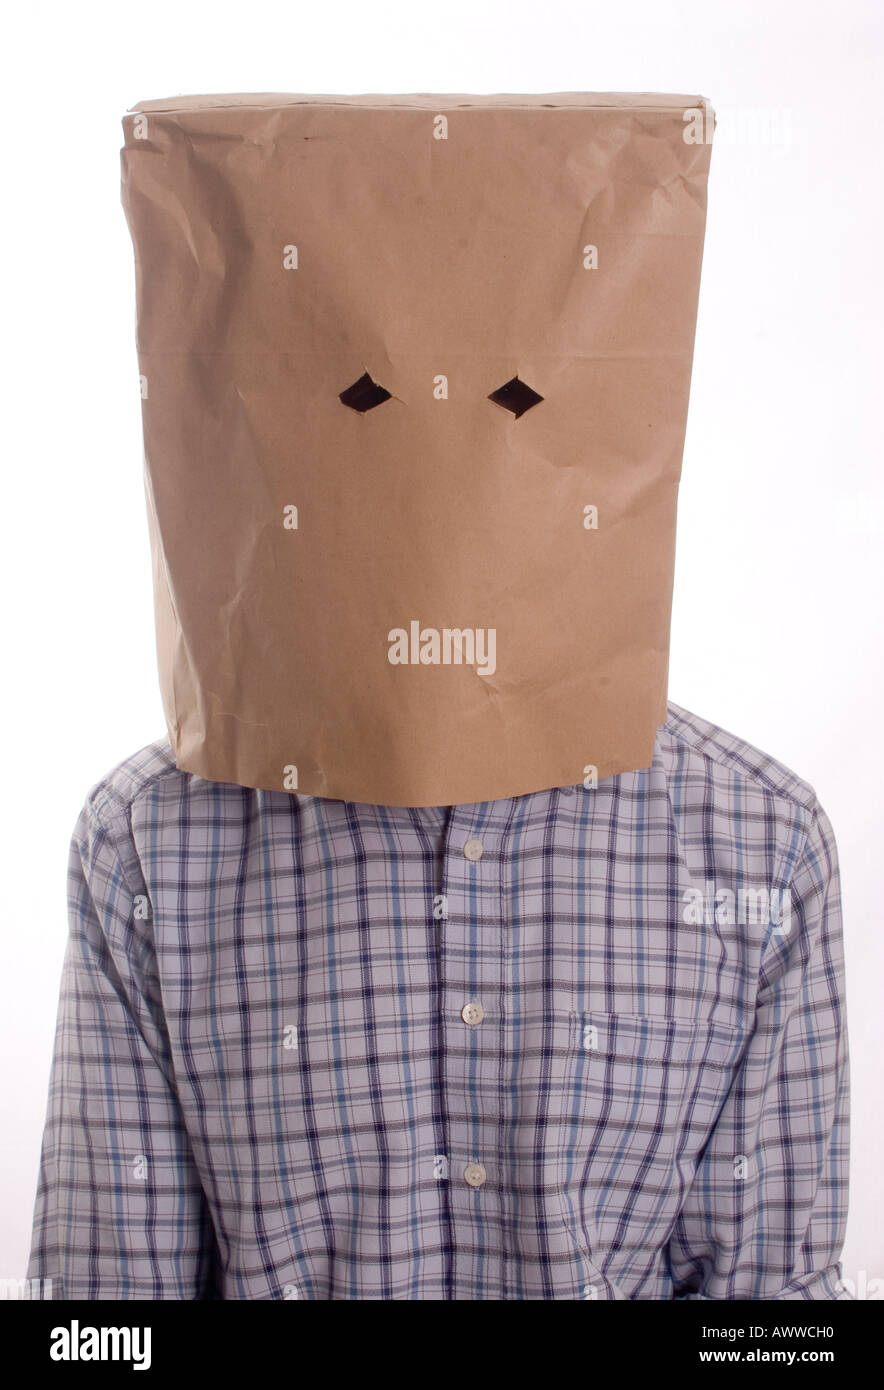 Head in a paper bag Stock Photo - Alamy